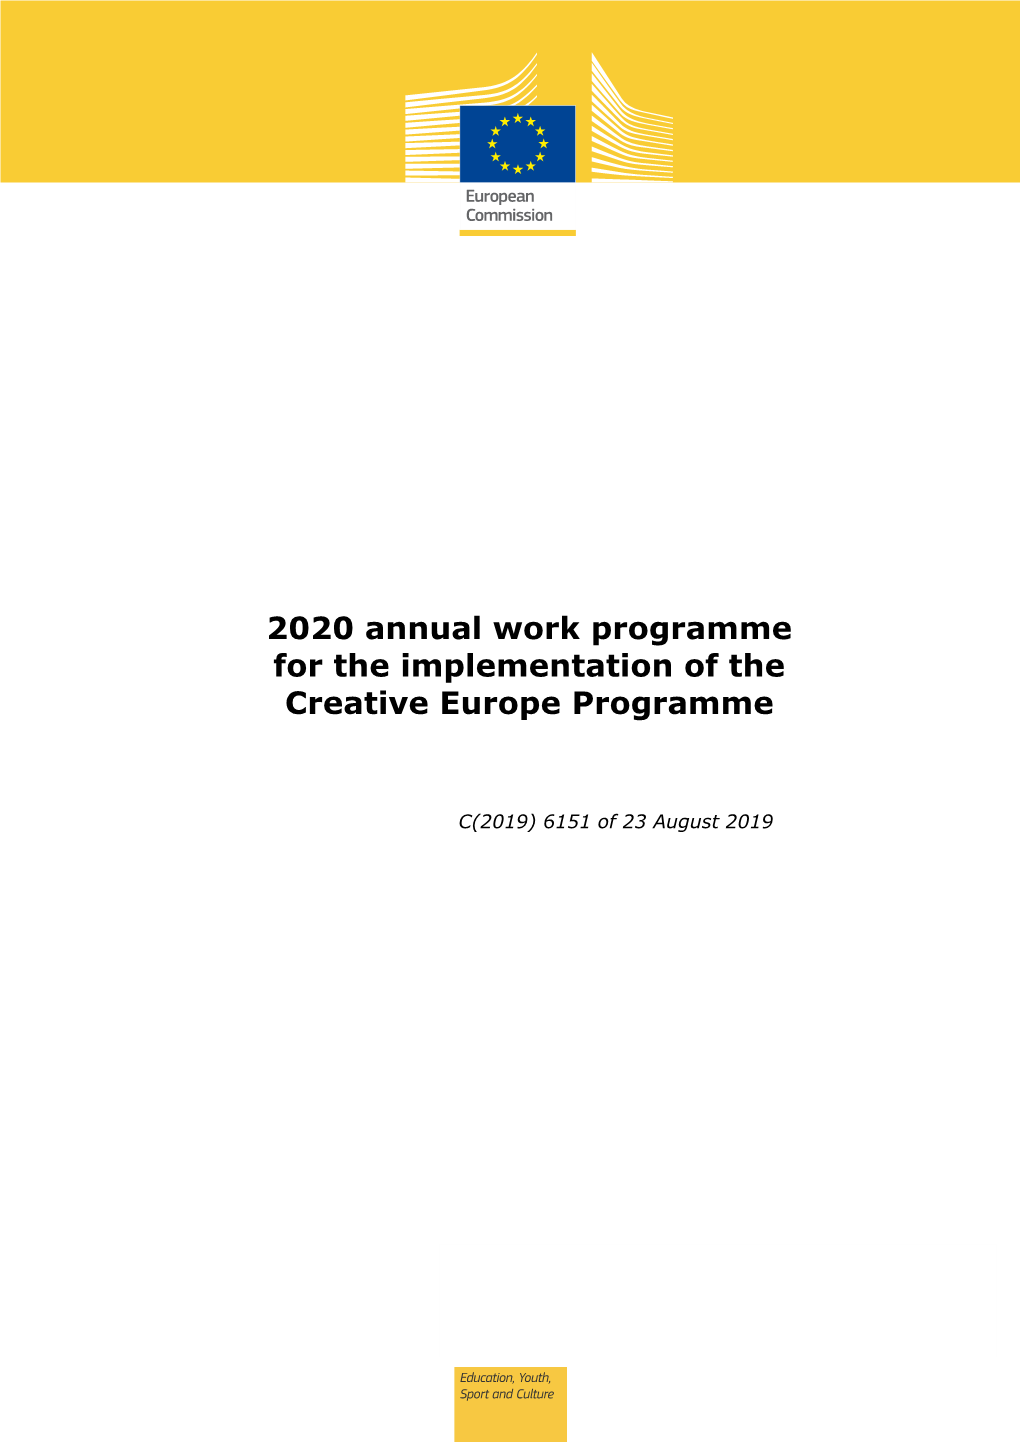 Work Programme 2020 and the Work Programme 2021